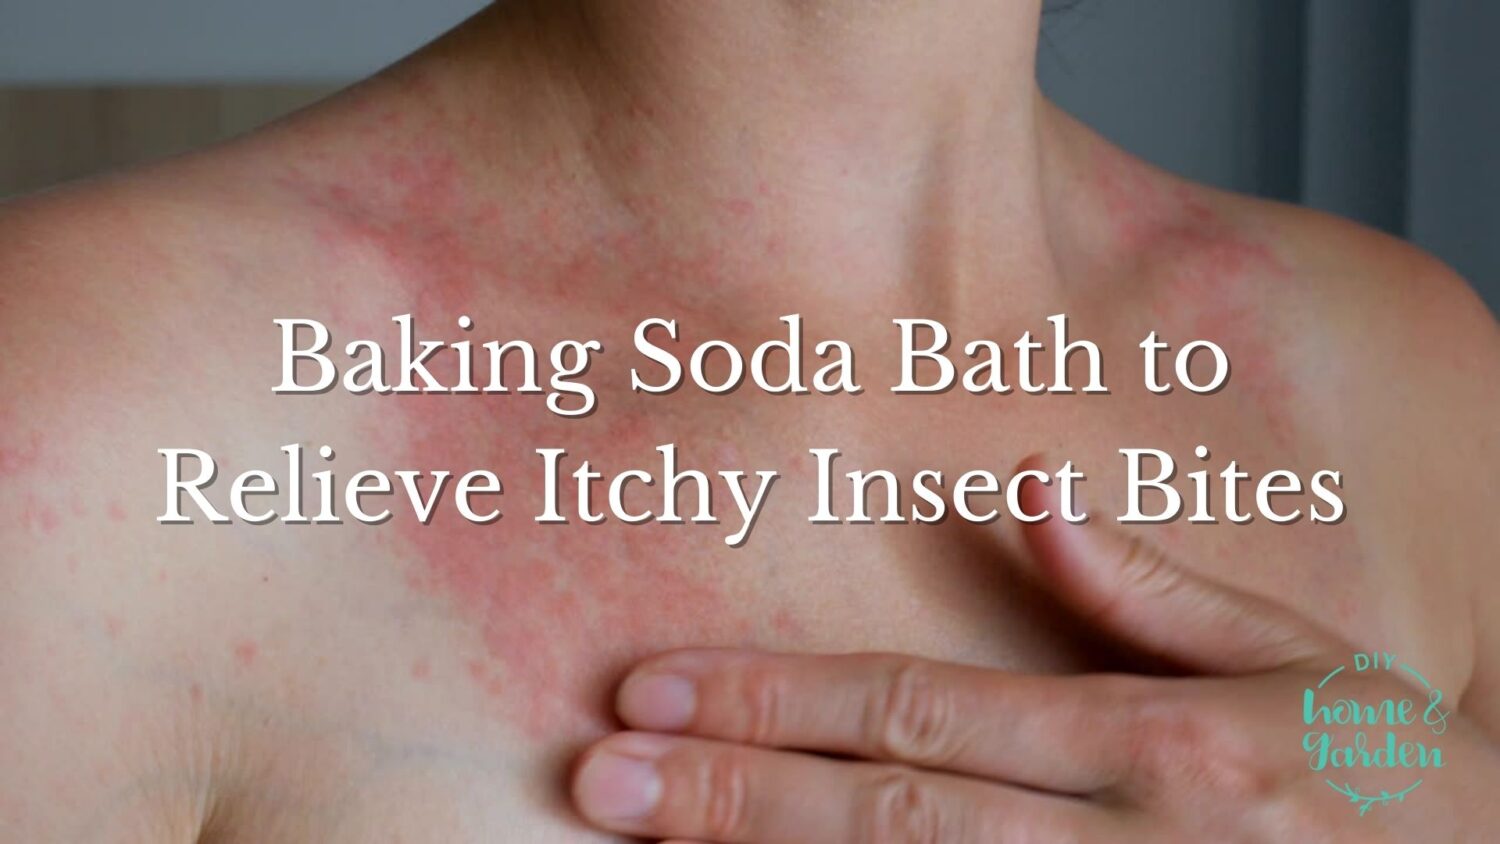 Baking Soda Bath Recipe to Relieve Itchy Insect bites (comfort your skin)